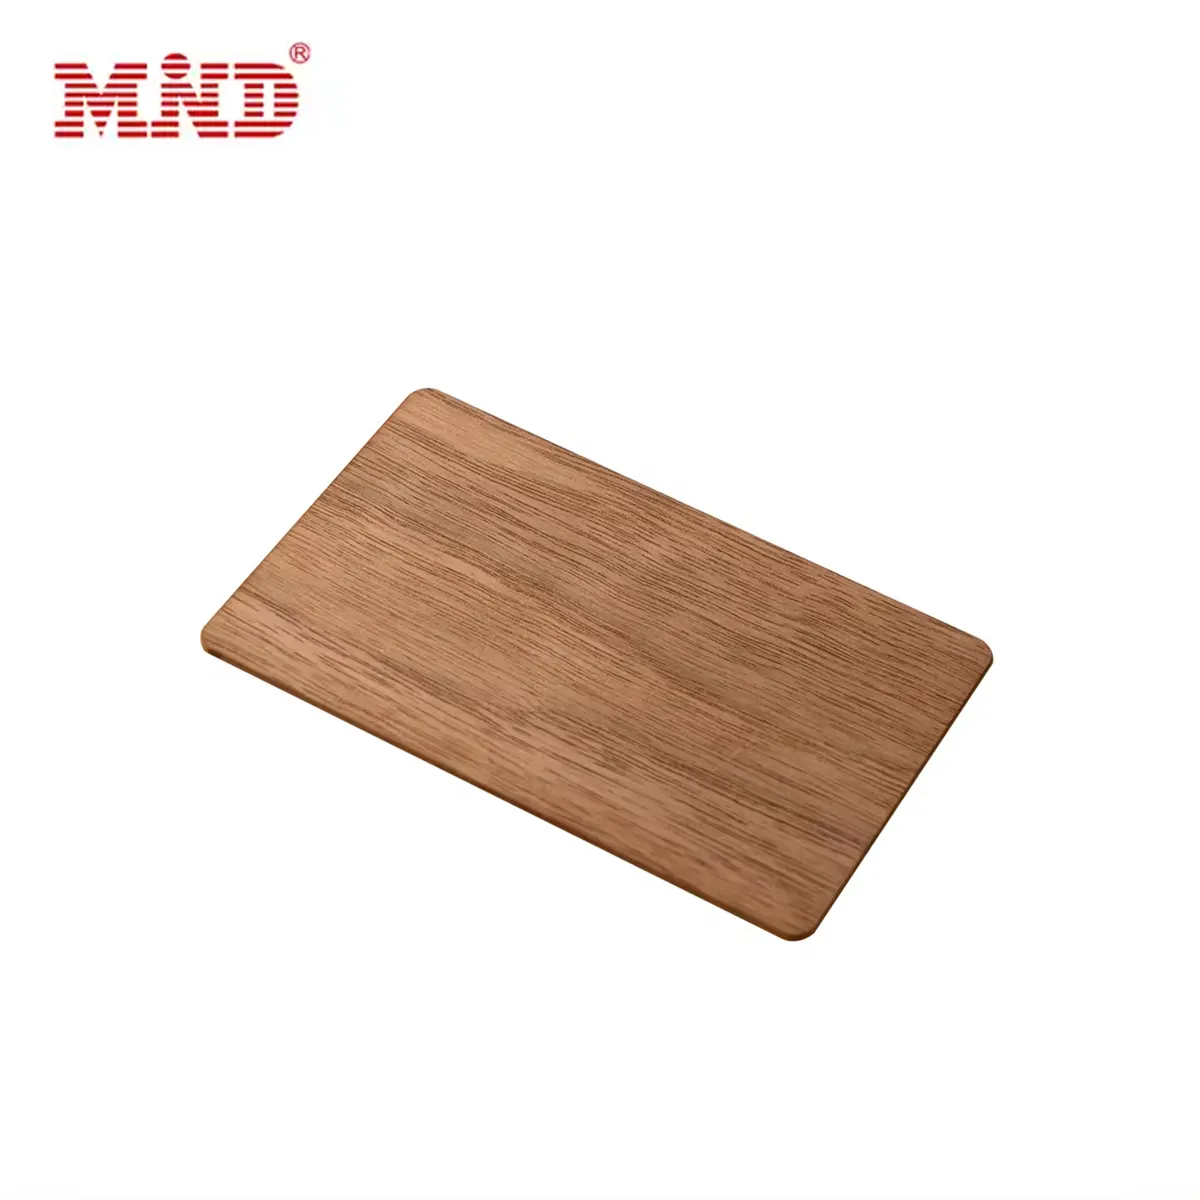 NFC Product NTAG 213 NFC Wood Card 13.56Mhz Programmable Wooden key NFC Card hotel